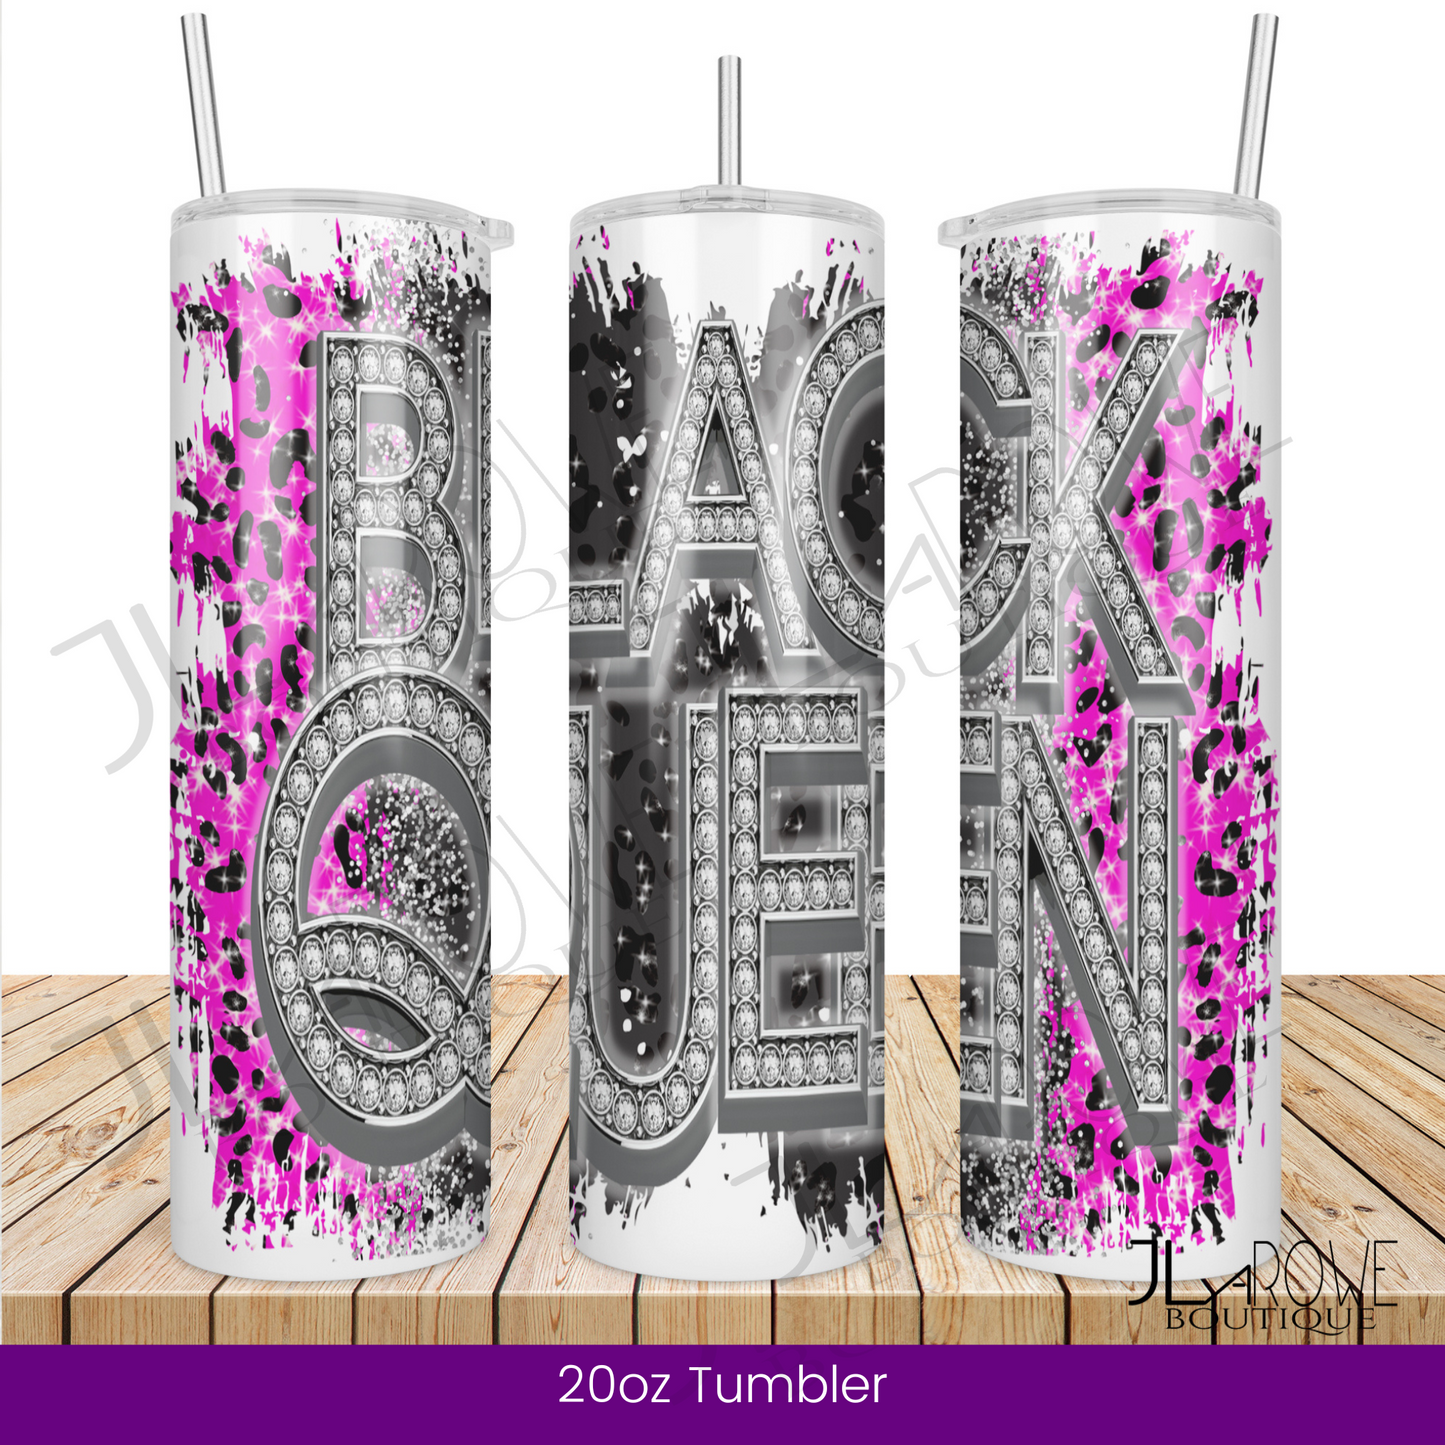 Black Queen with Silver Bling - 20oz Tumbler